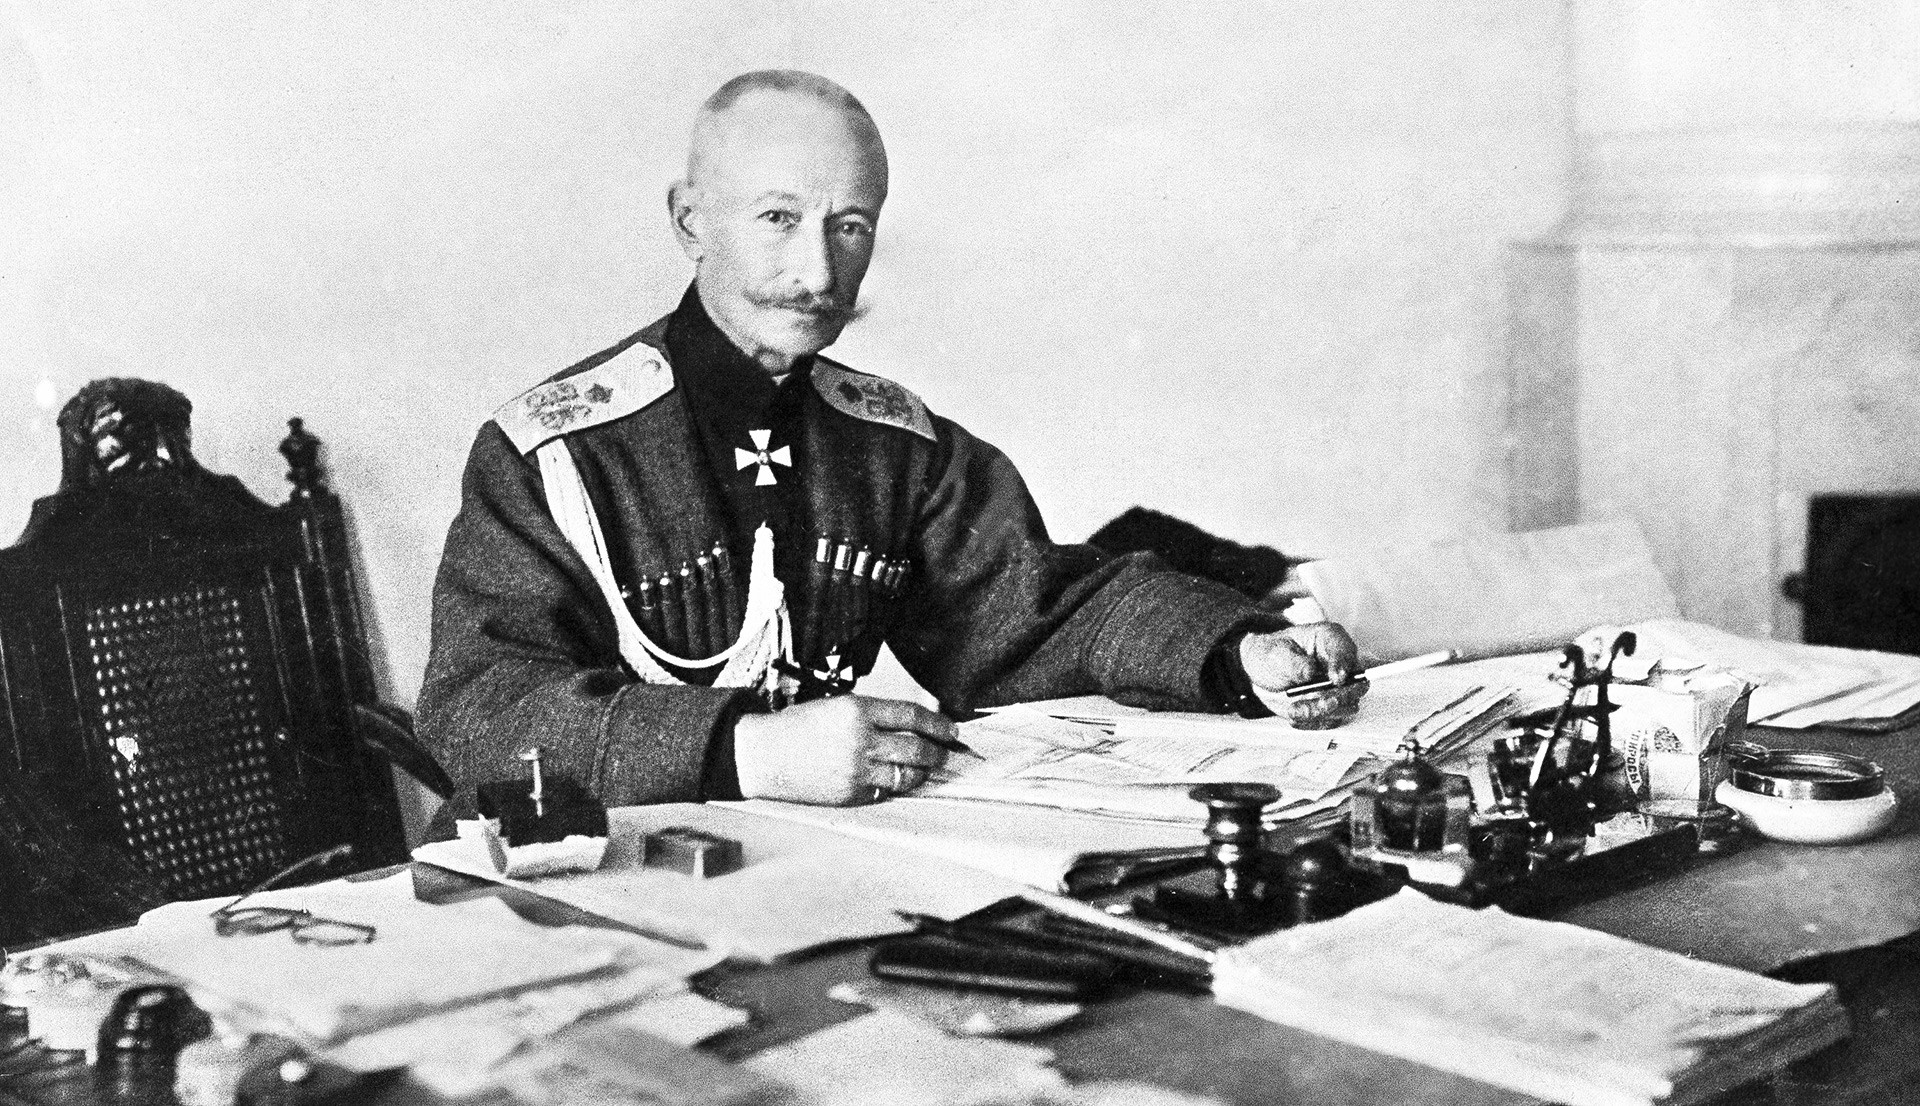 General Alexey Brusilov (1853-1926) headed a successful offensive operation in the South-Western Front in 1916